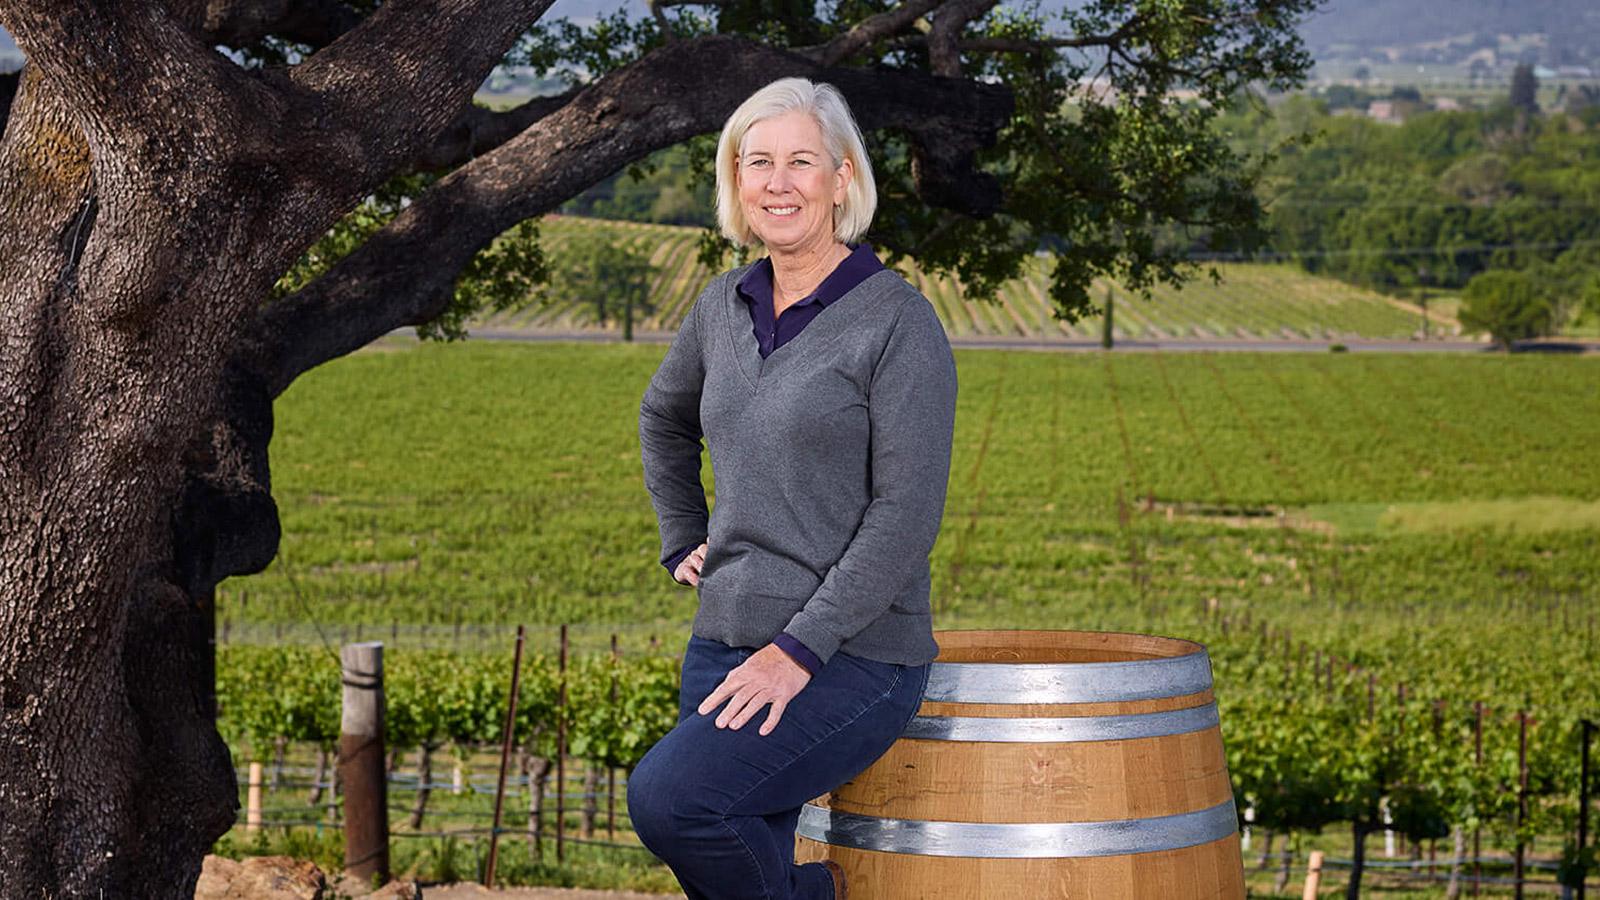 Celia Welch, Consulting Director of Winemaking